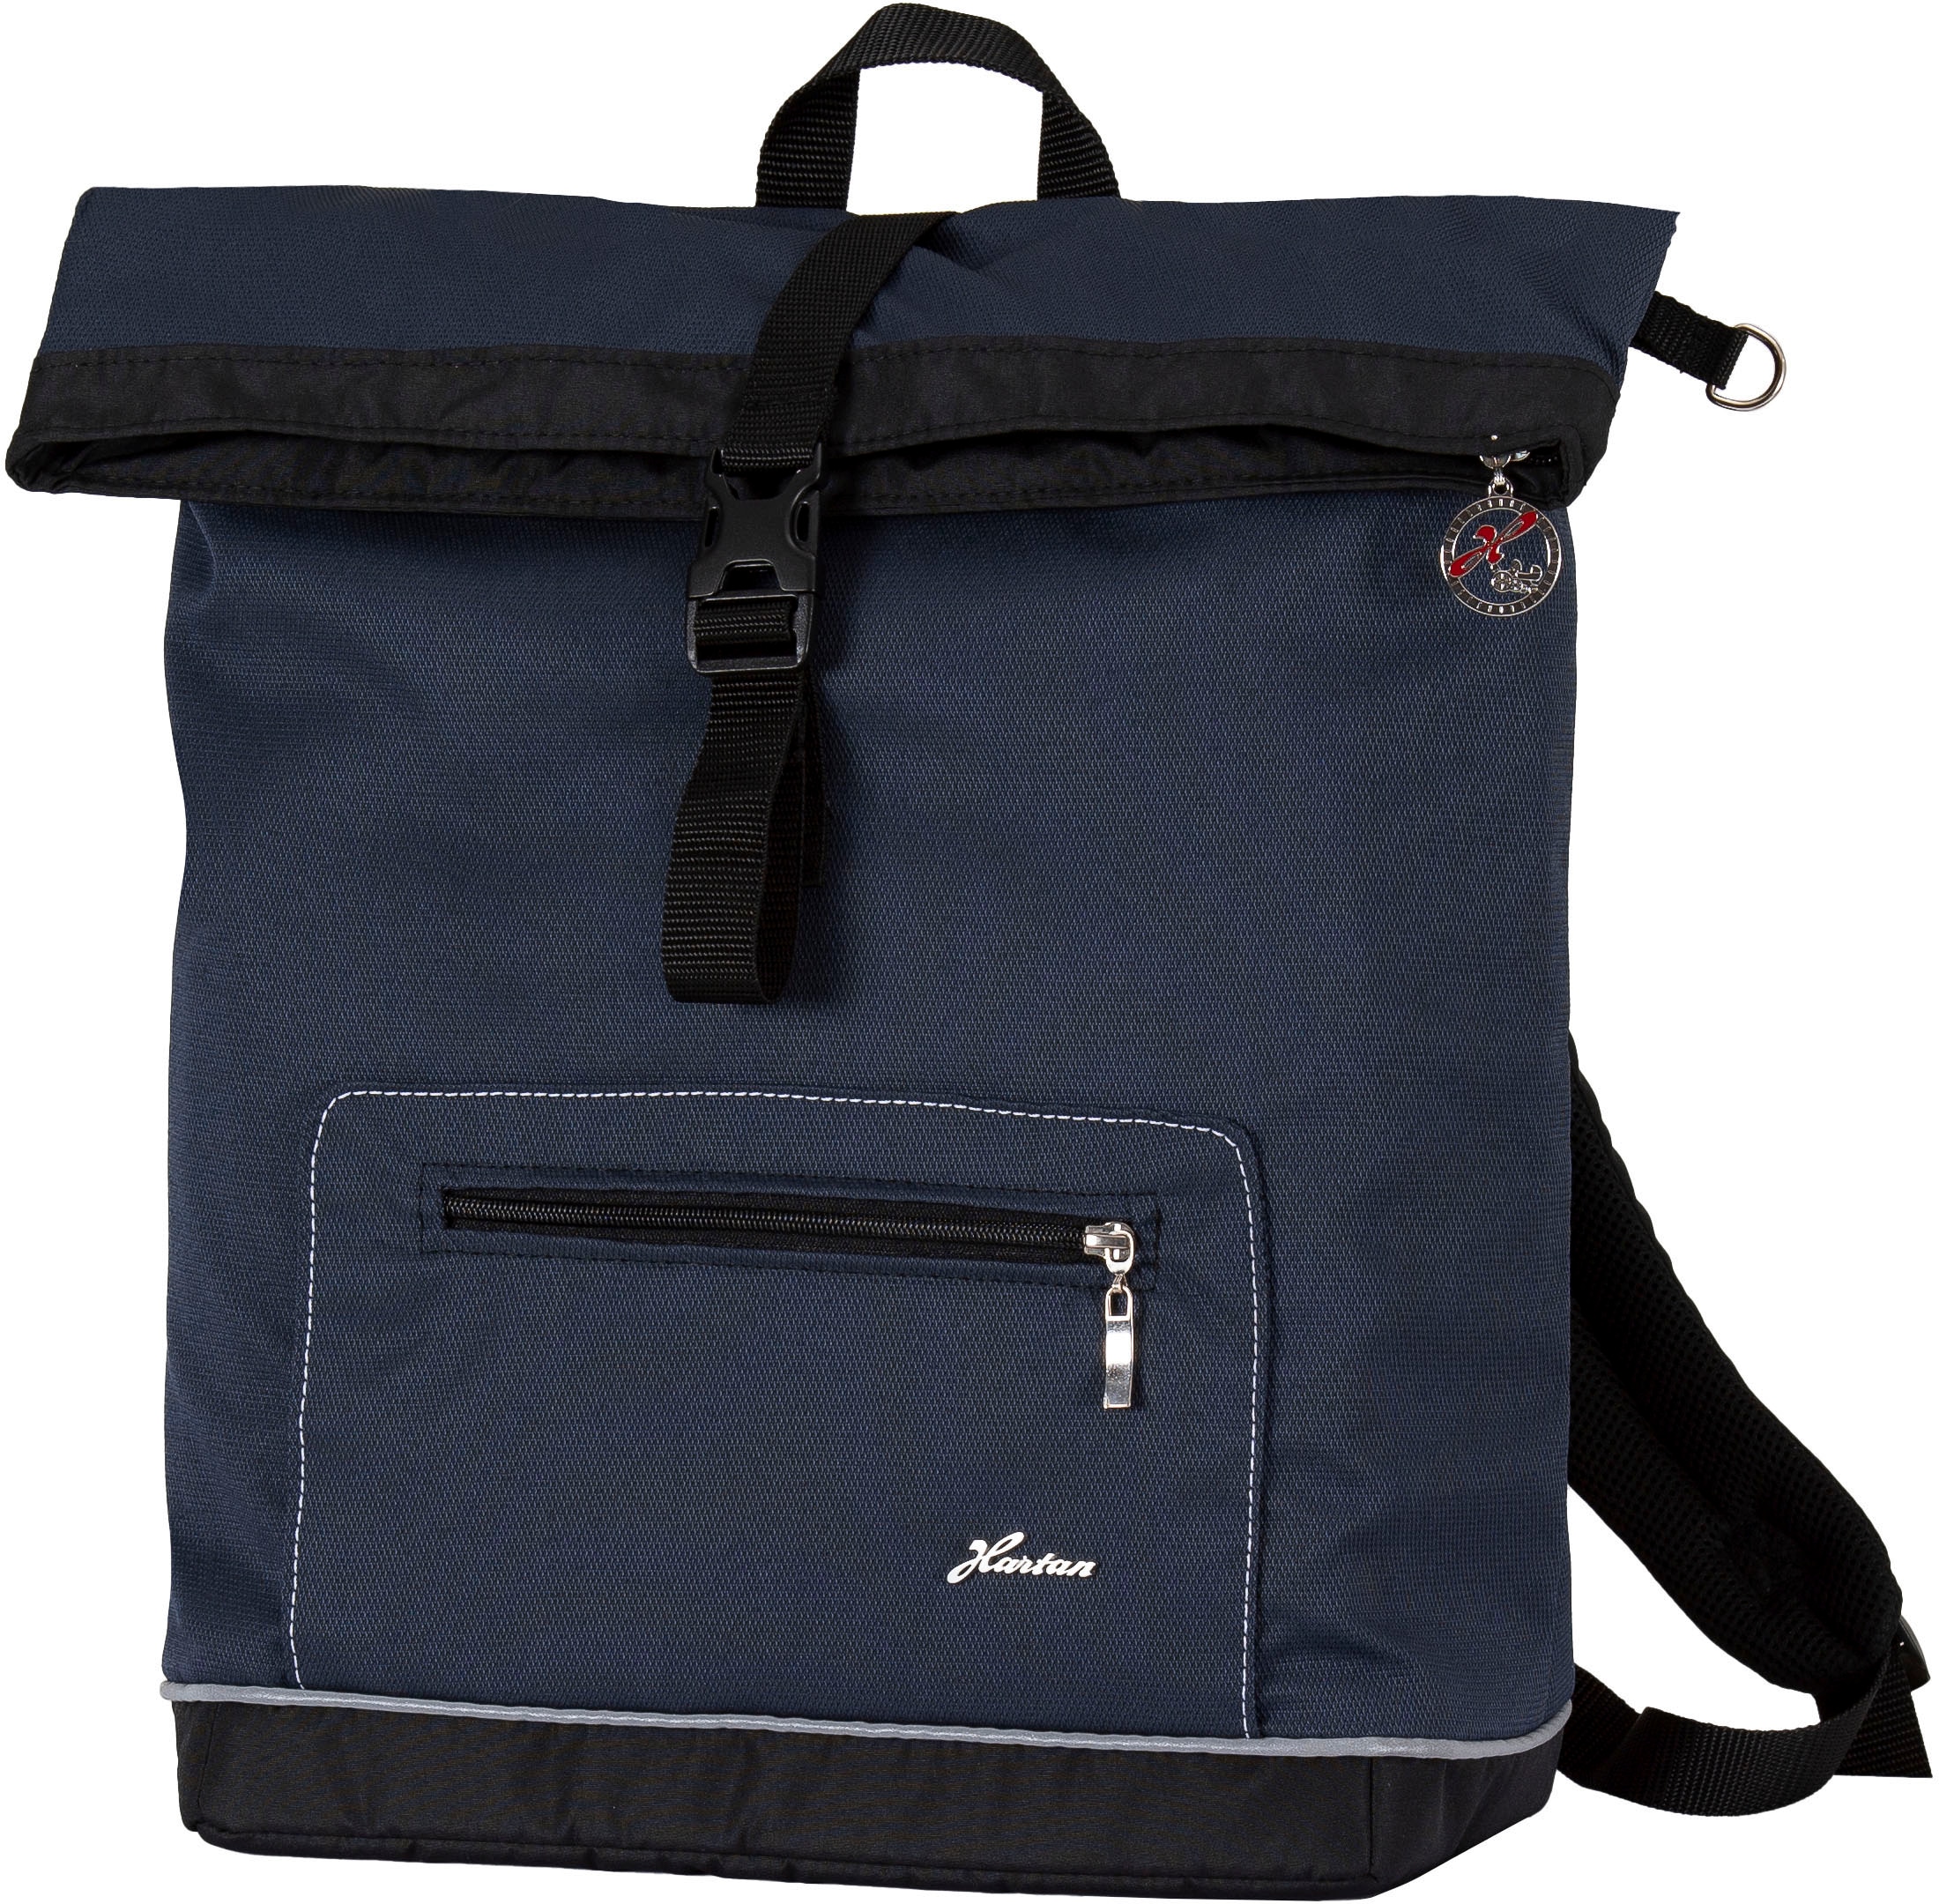 Hartan Wickelrucksack »Space bag - Casual Collection«, mit Thermofach; Made in Germany